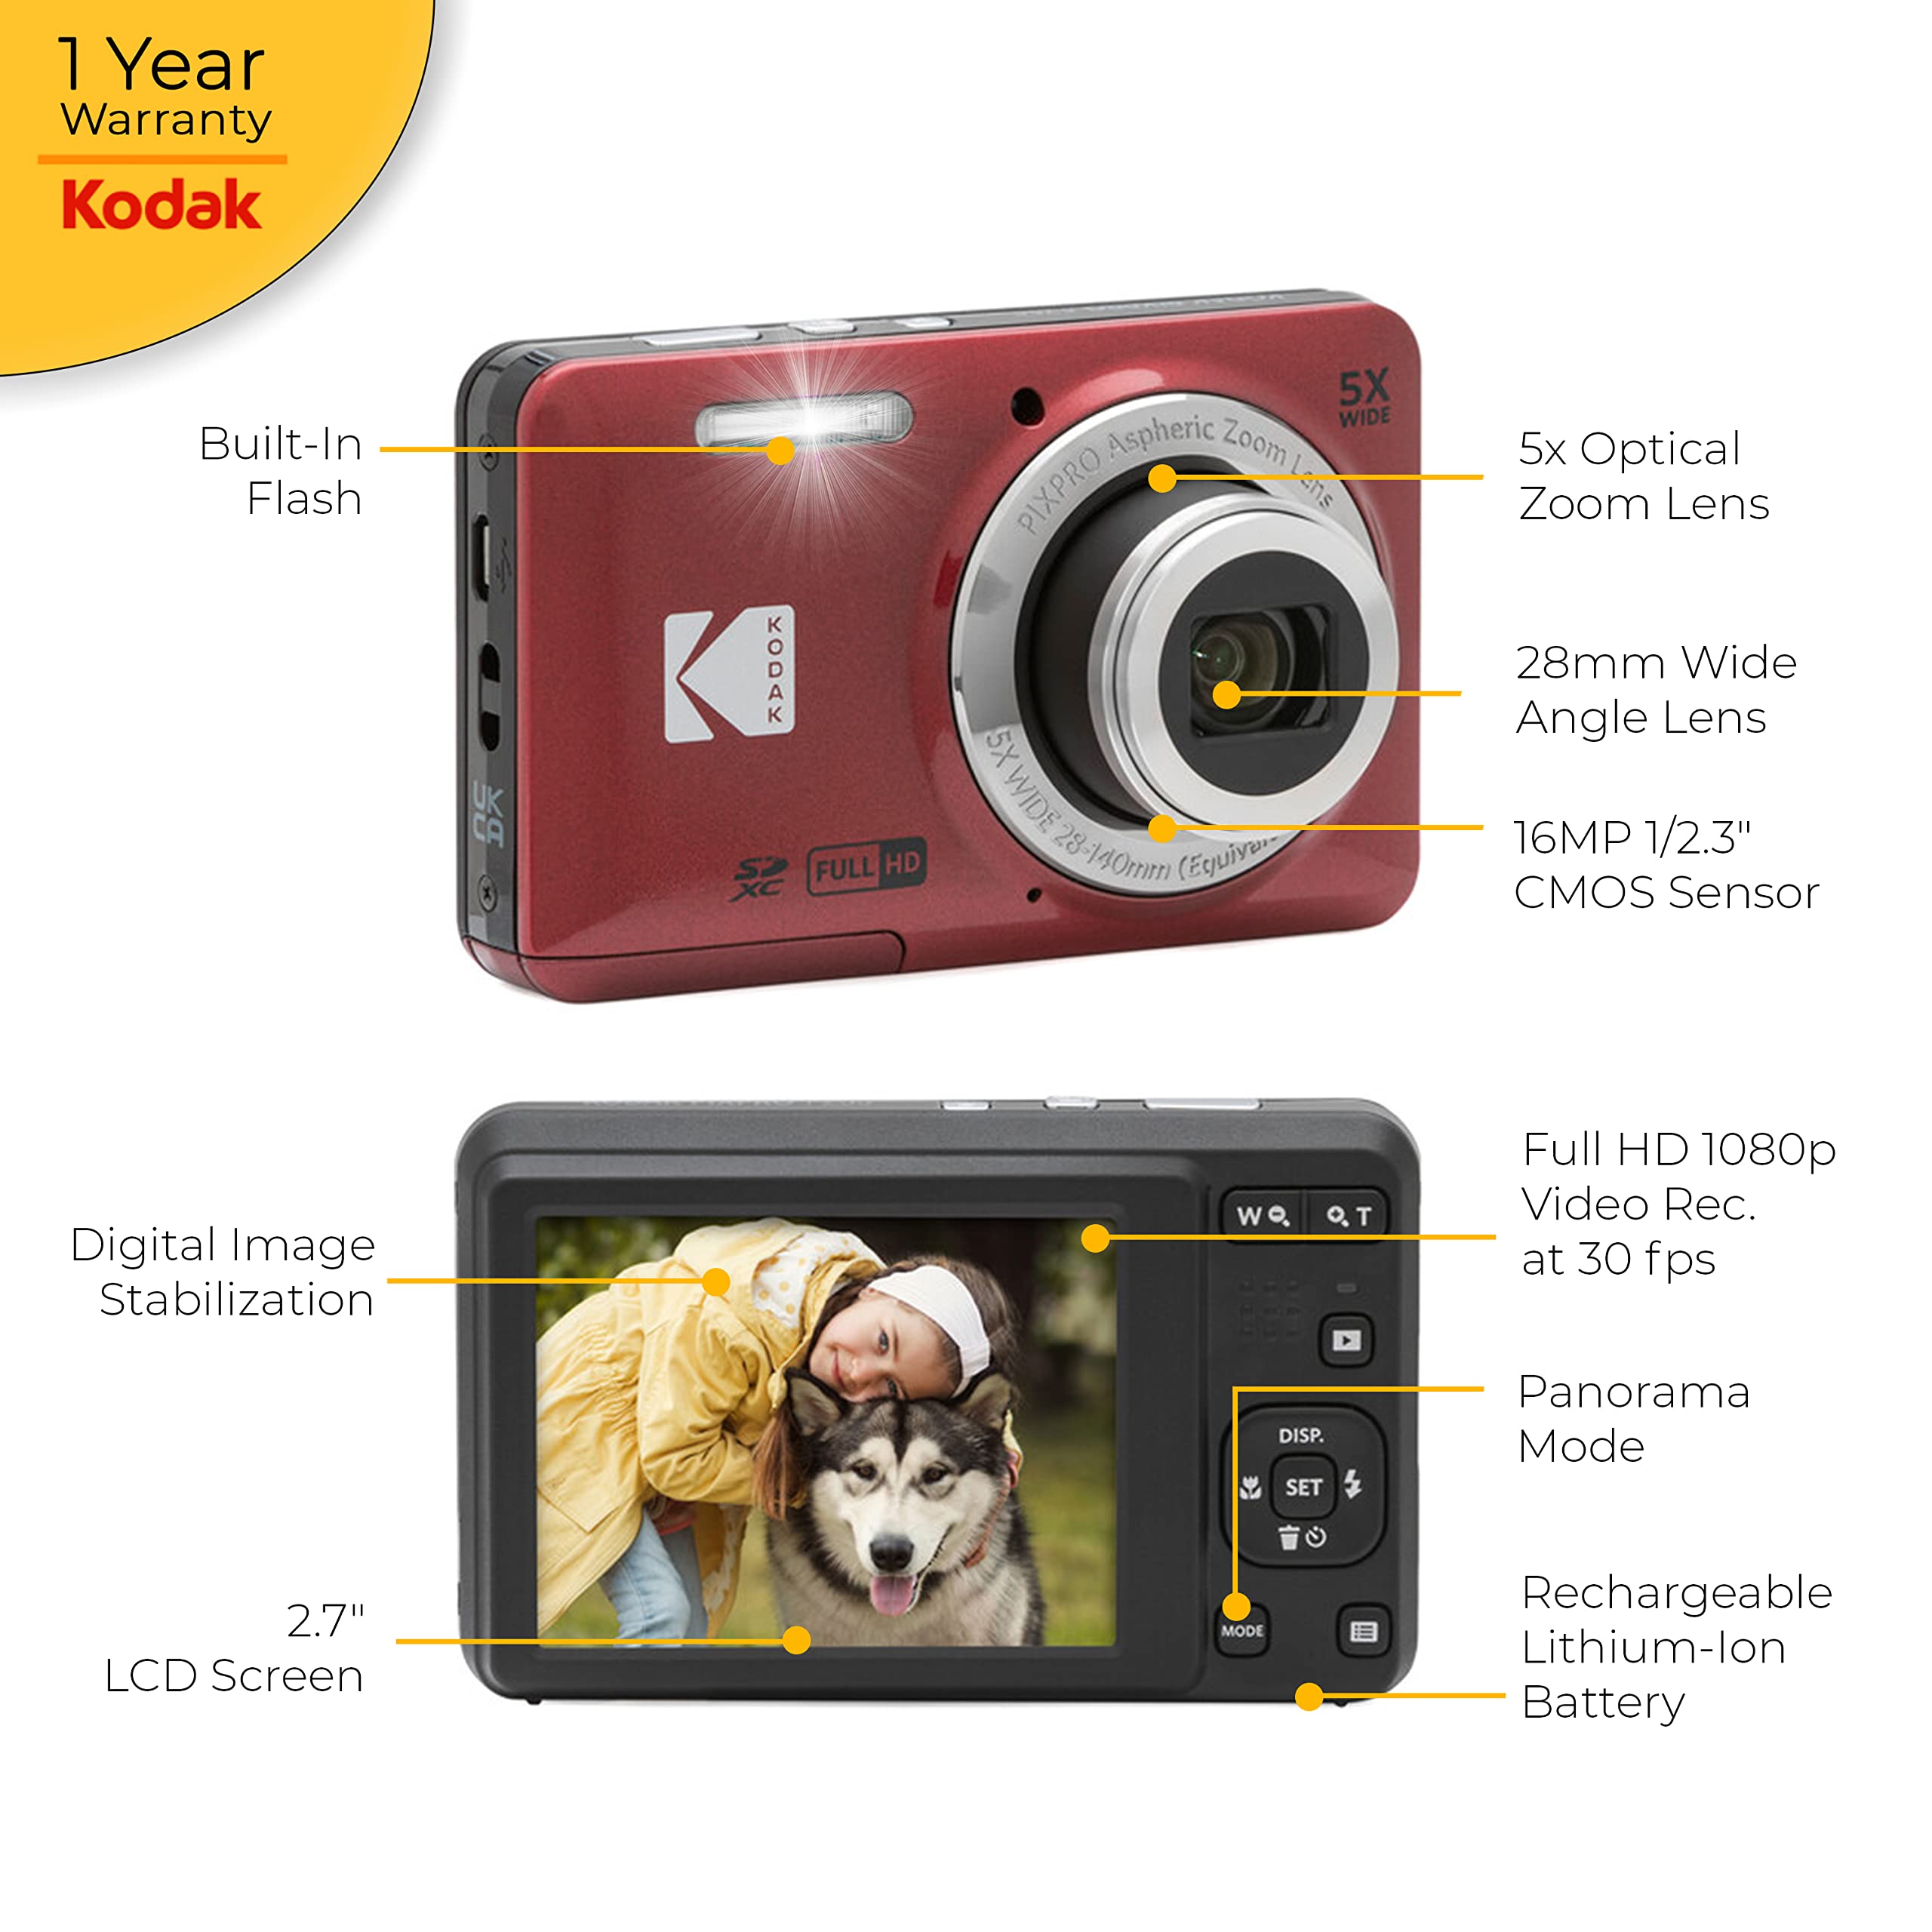 Kodak PIXPRO FZ55 Digital Camera (Red) + 32GB Memory Card + Point and Shoot Camera Case + Extendable Monopod + Lens Cleaning Pen + LCD Screen Protectors + Table Top Tripod – Ultimate Bundle